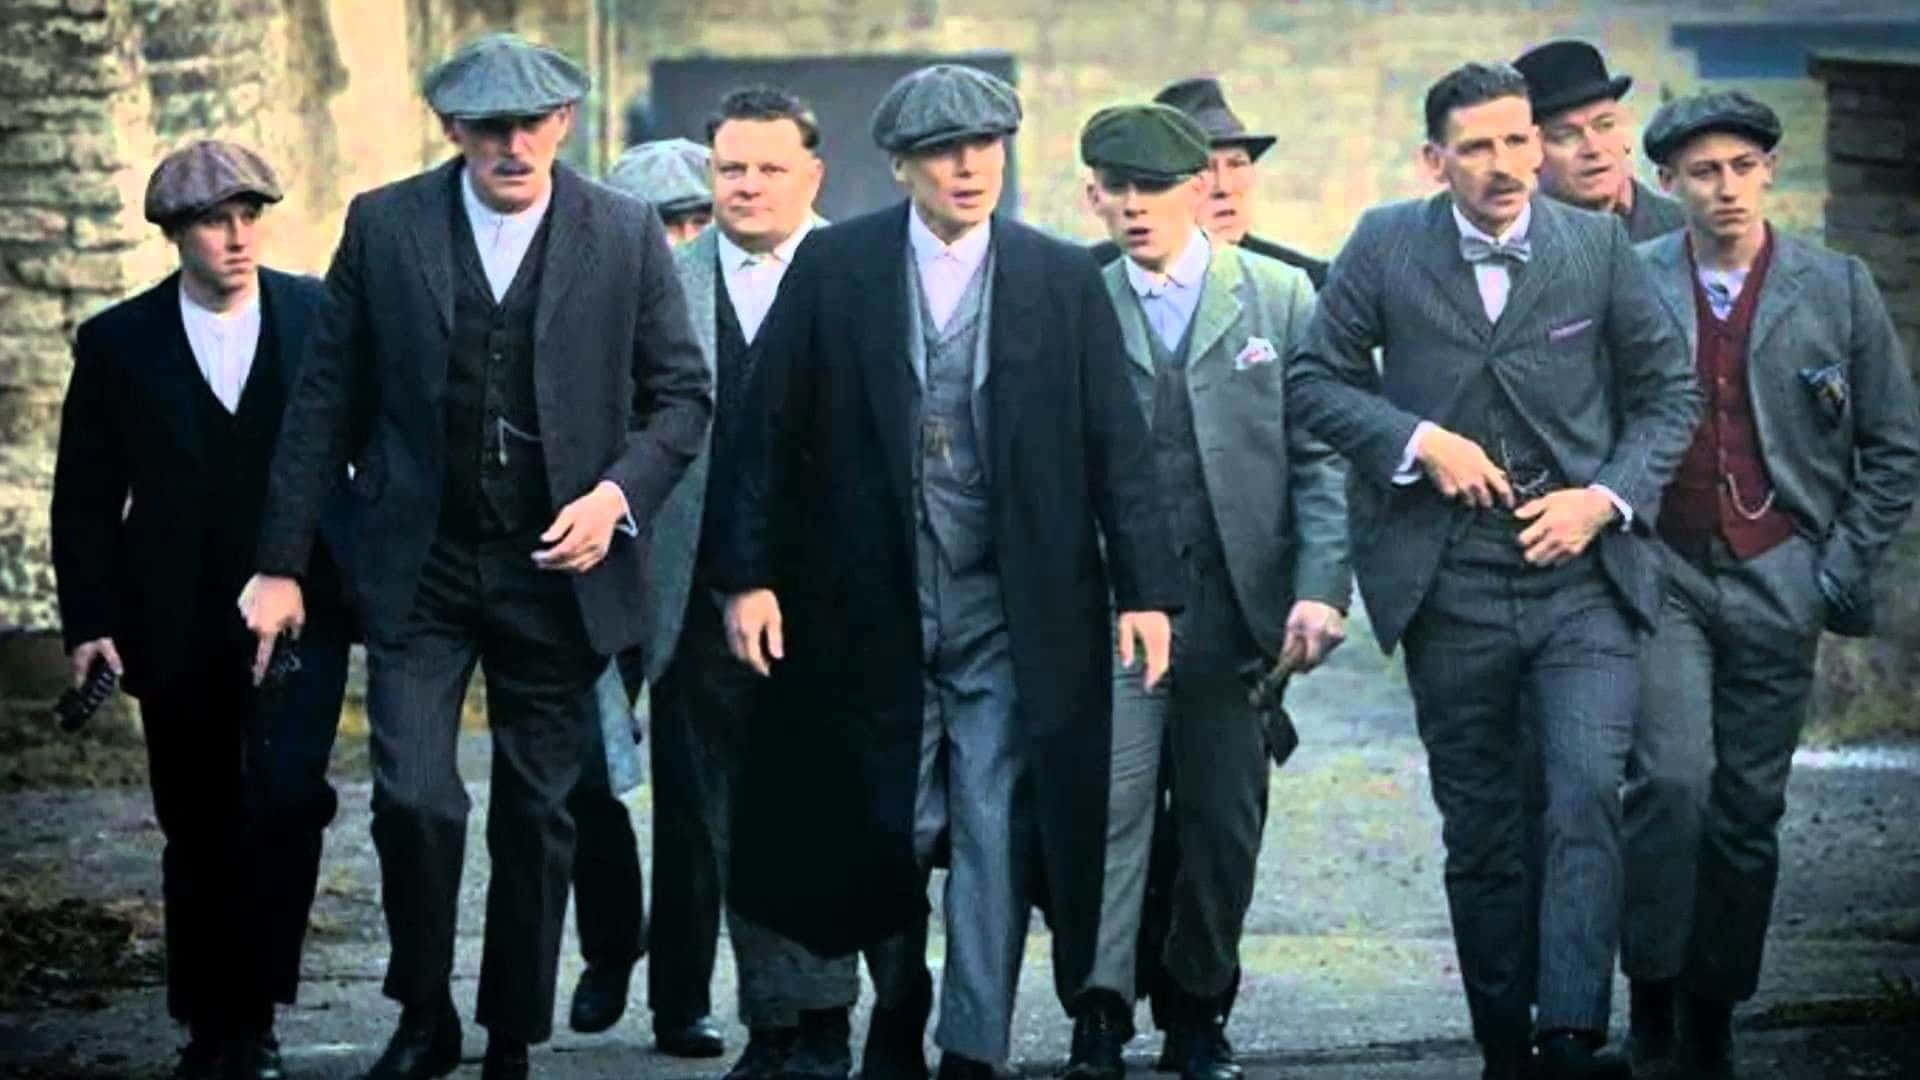 Experience the Reckless Adrenaline Rush of Peaky Blinders